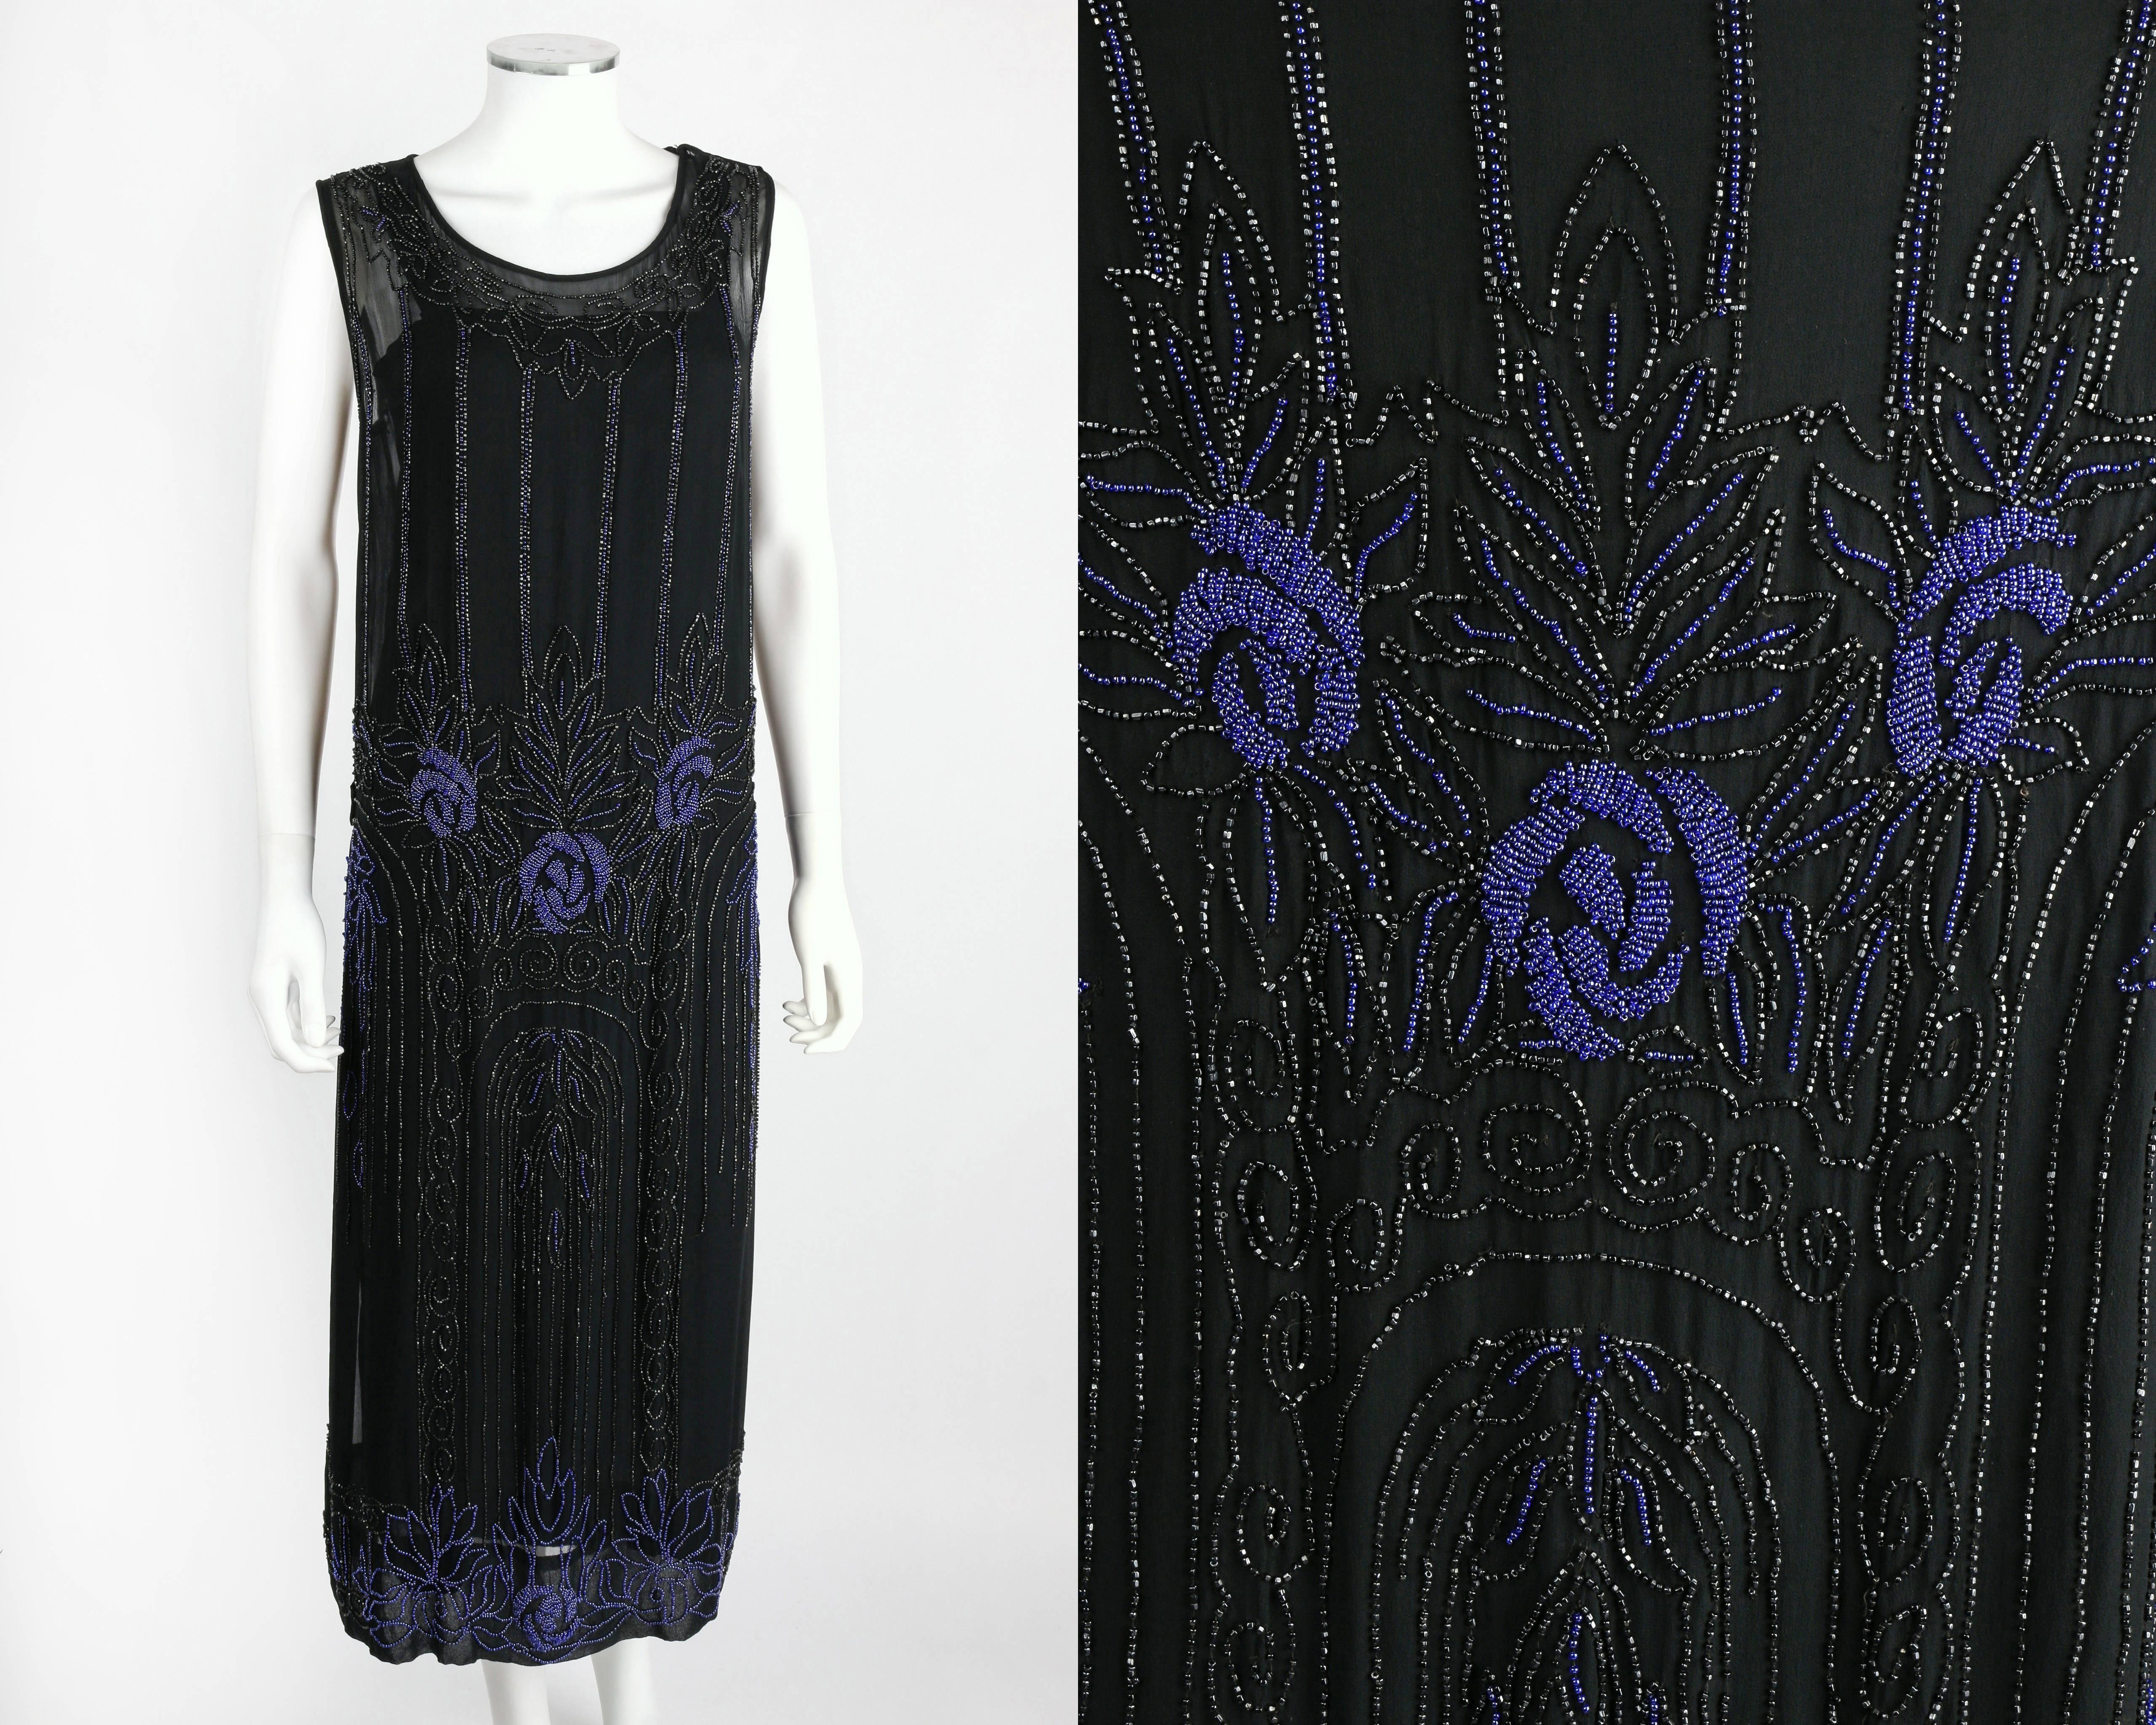 Vintage Couture c.1920's black silk chiffon cocktail dress with slip. Black sheer silk chiffon with black and purple-blue floral art deco design. Sleeveless. Scoop neckline. Four side seam knife pleats at dropped waistline. Slip on style. Three snap